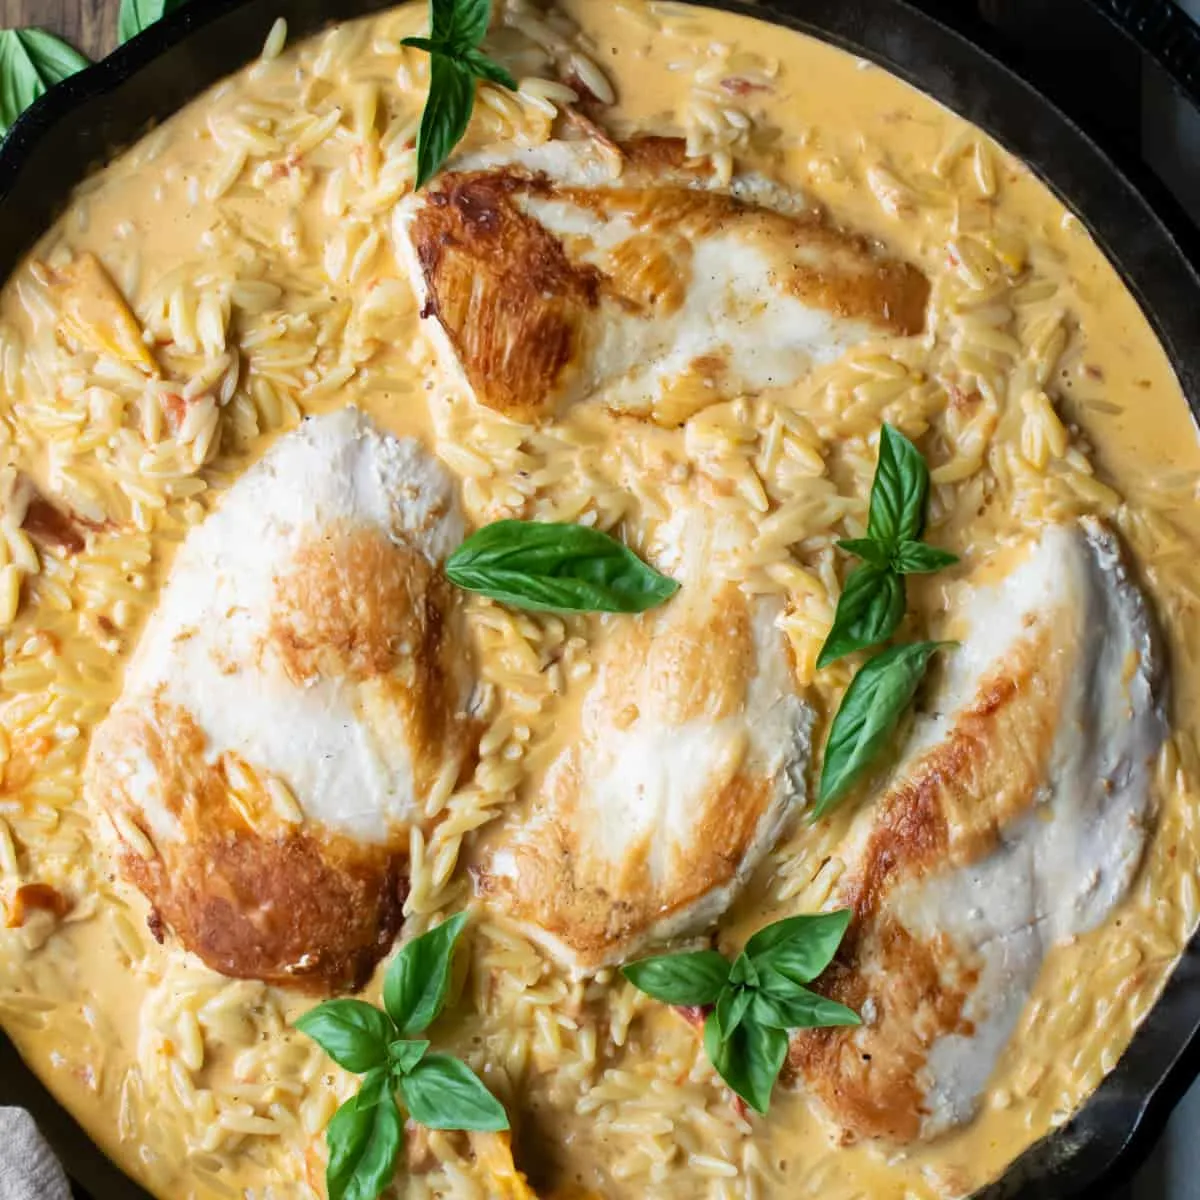 Chicken breasts and orzo in a creamy sauce garnished with fresh basil leaves.